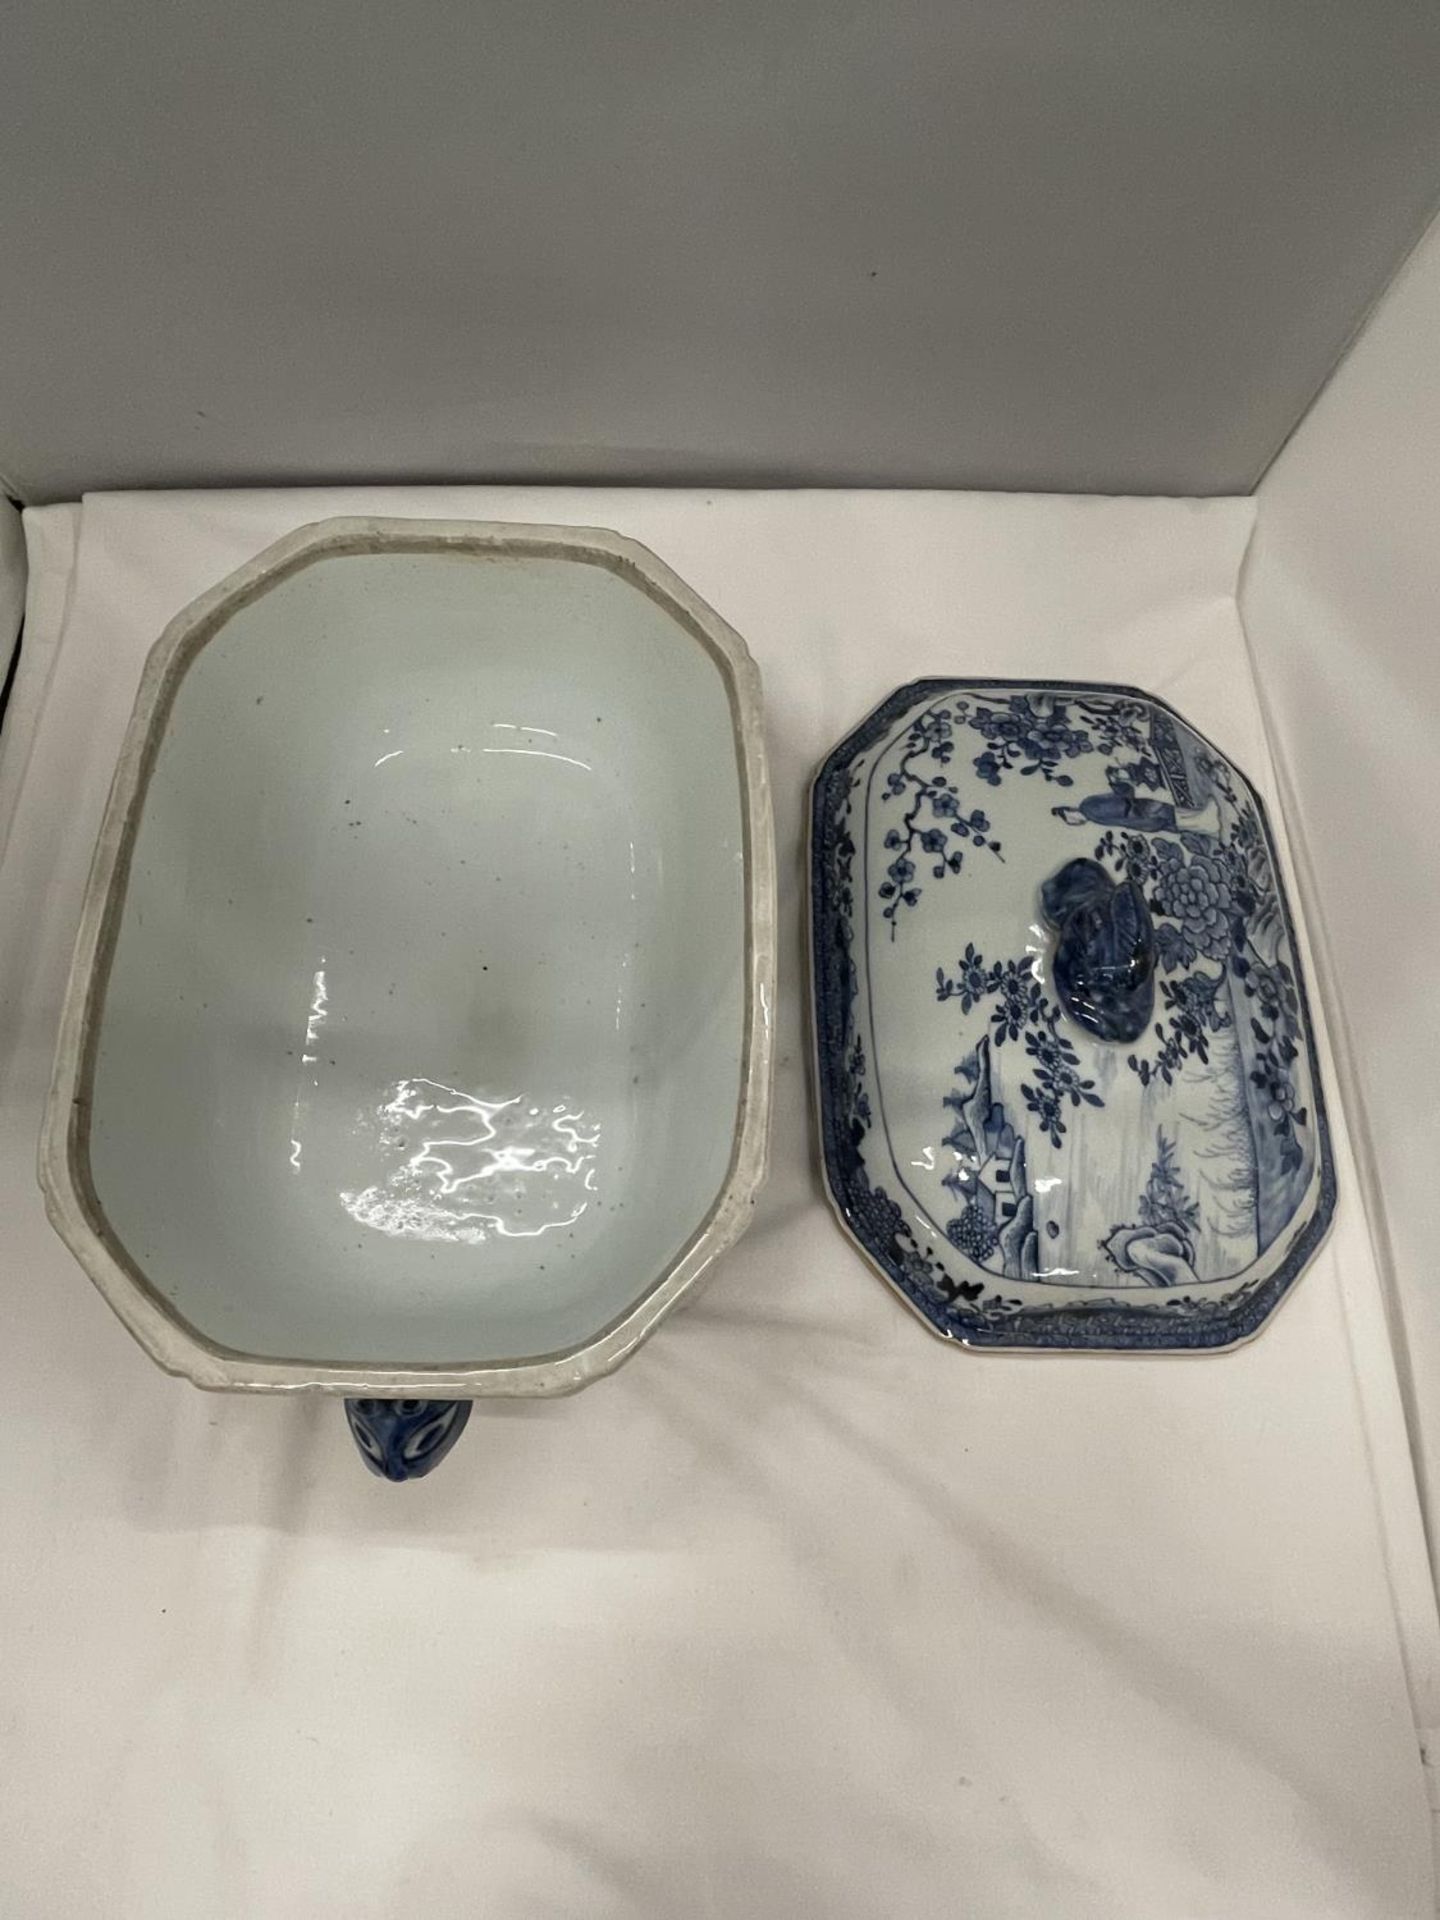 A BELIEVED TO BE LATE 18TH/EARLY 19TH CENTURY CHINESE QING DYNASTY/NANKIN BLUE AND WHITE LARGE - Image 8 of 9